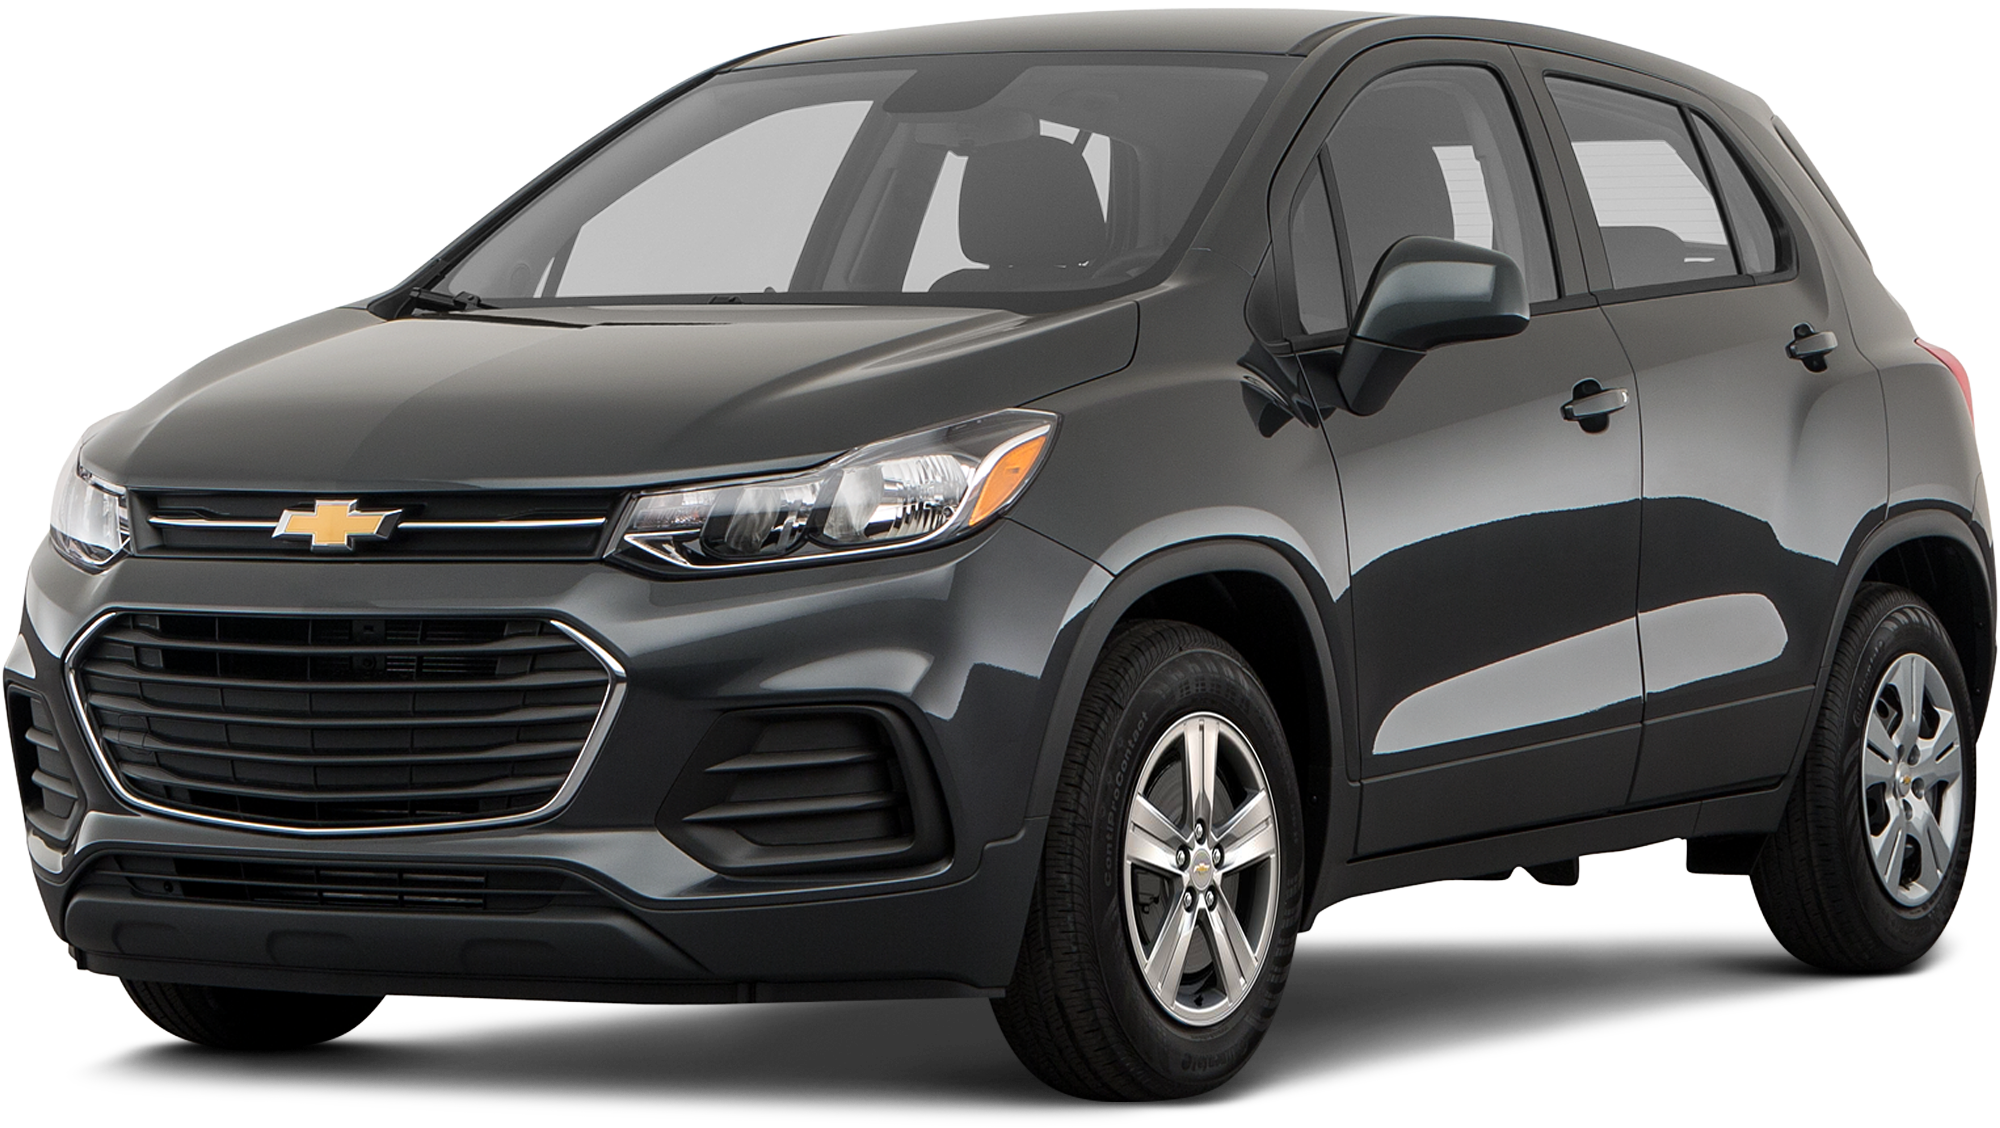 2022 Chevrolet Trax Incentives, Specials & Offers in Fremont OH